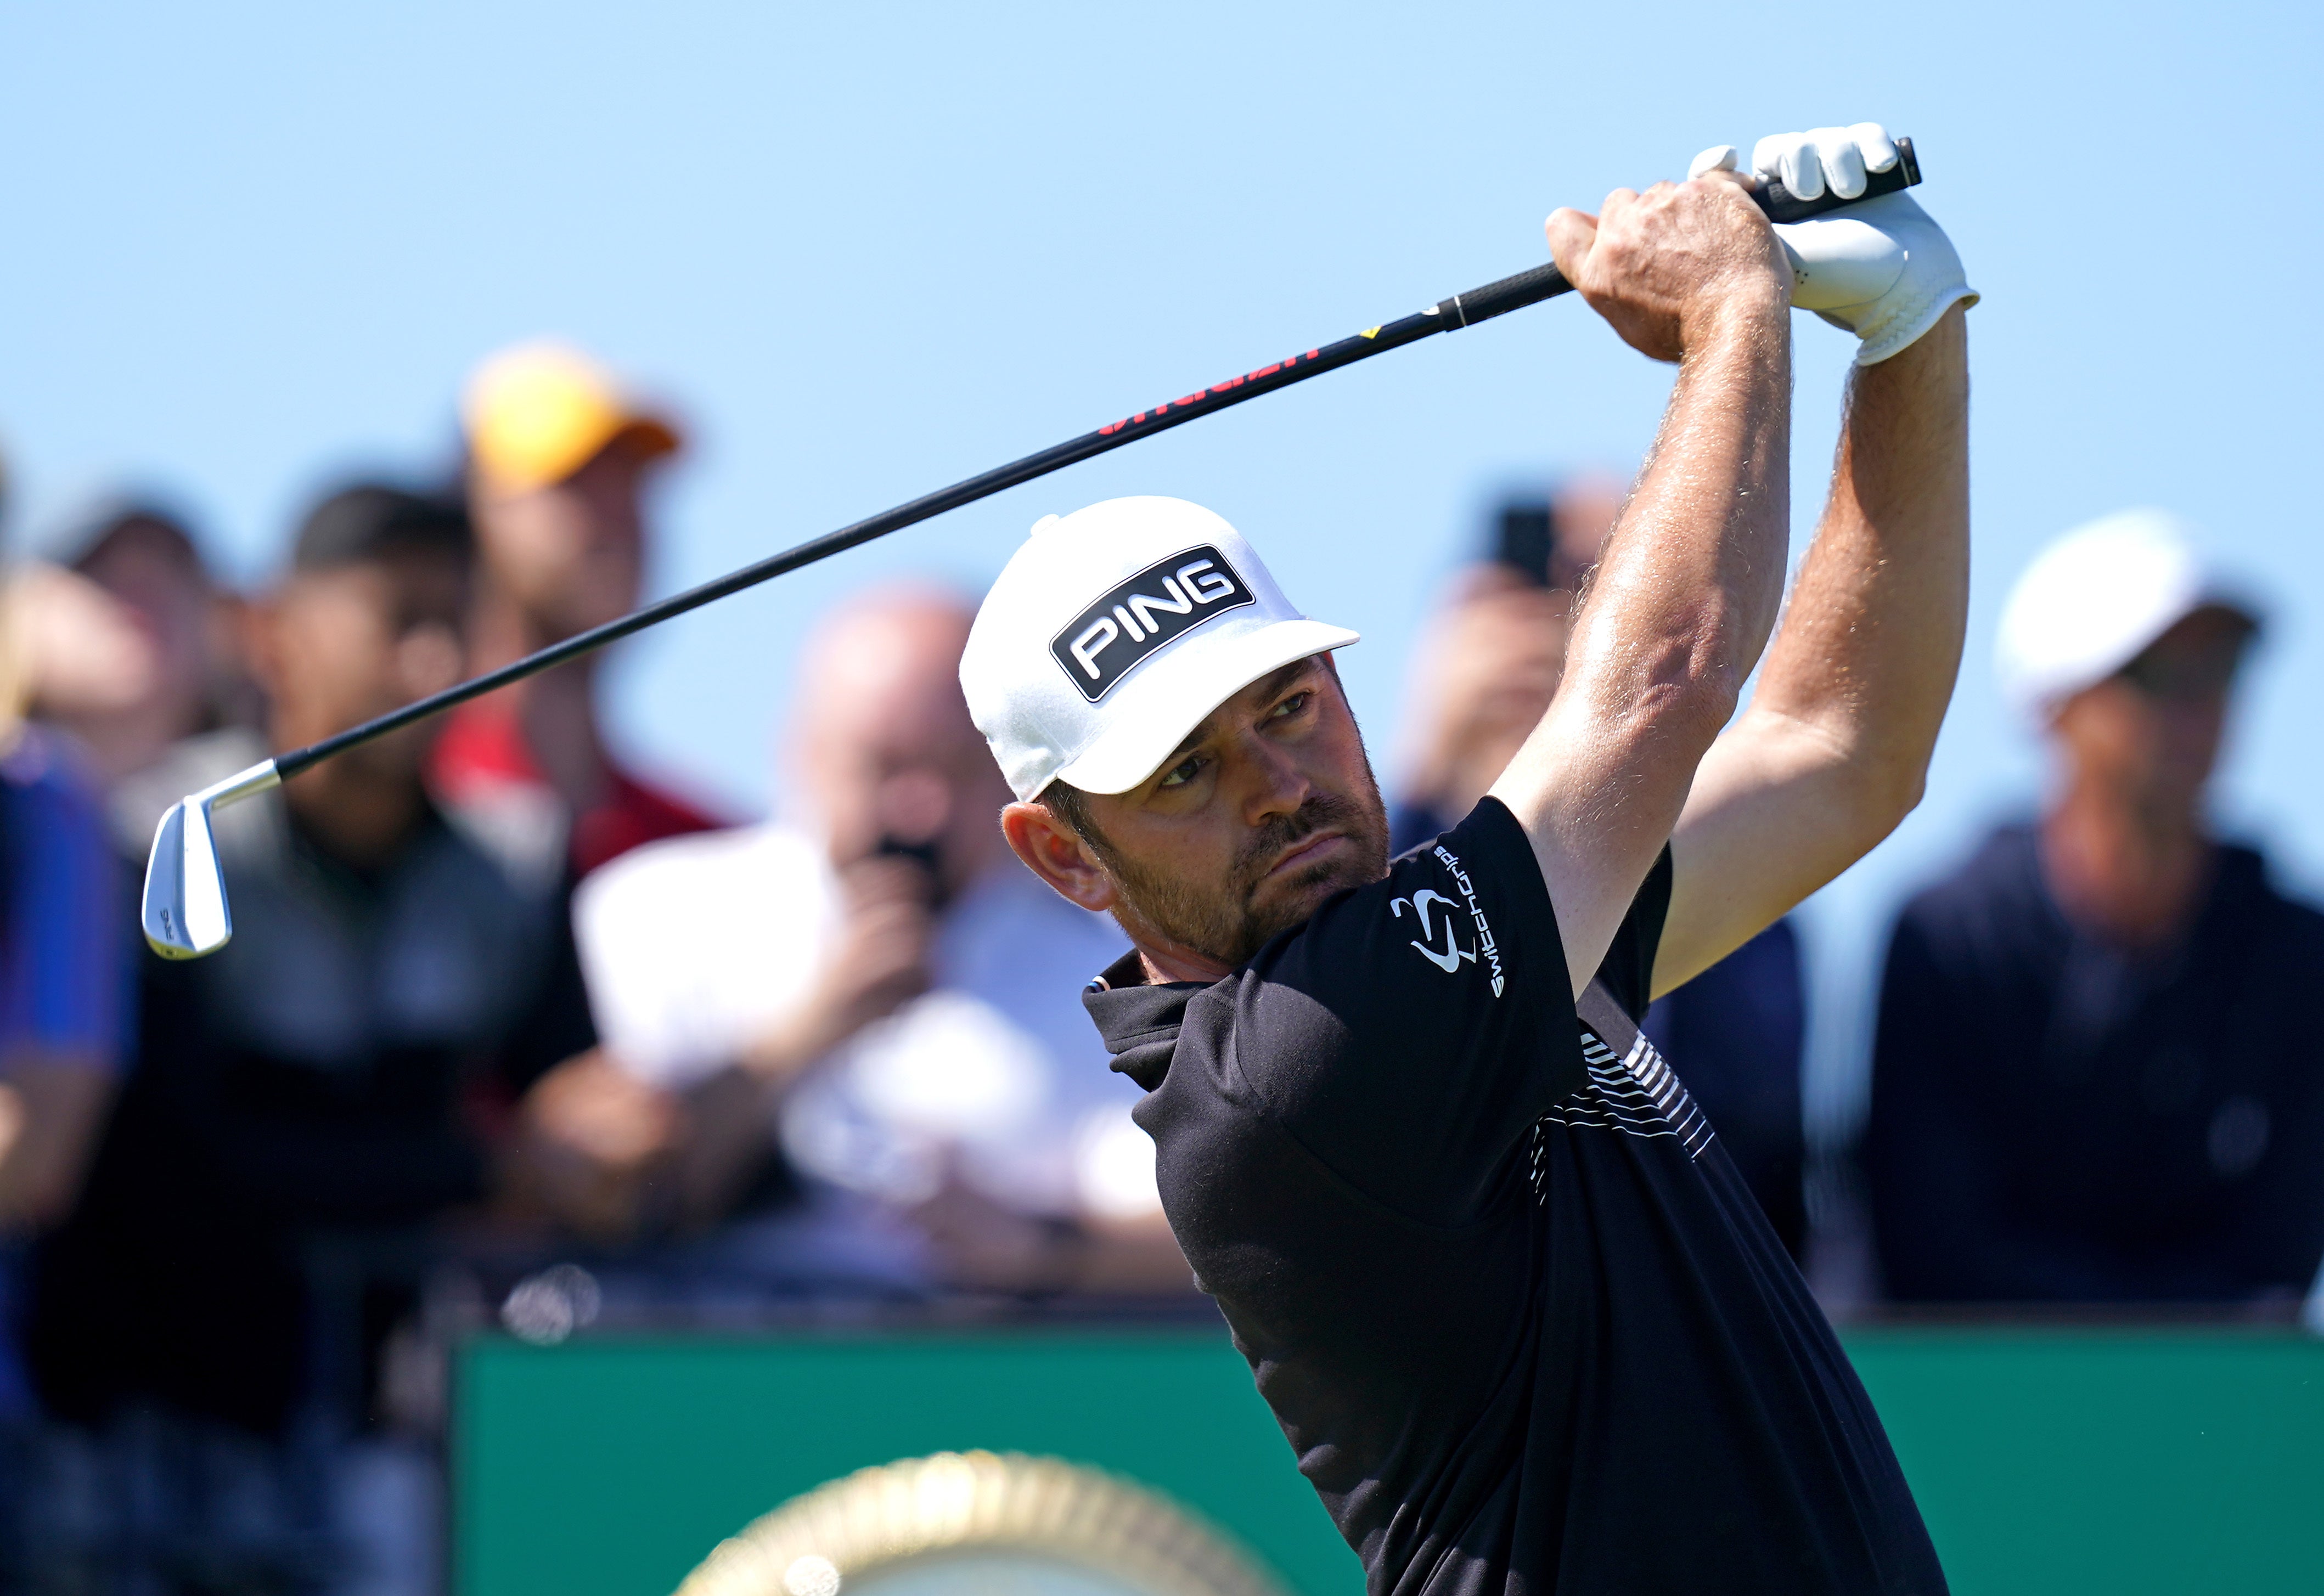 South Africa’s Louis Oosthuizen set an Open record with a halfway total of 129 at Royal St George’s